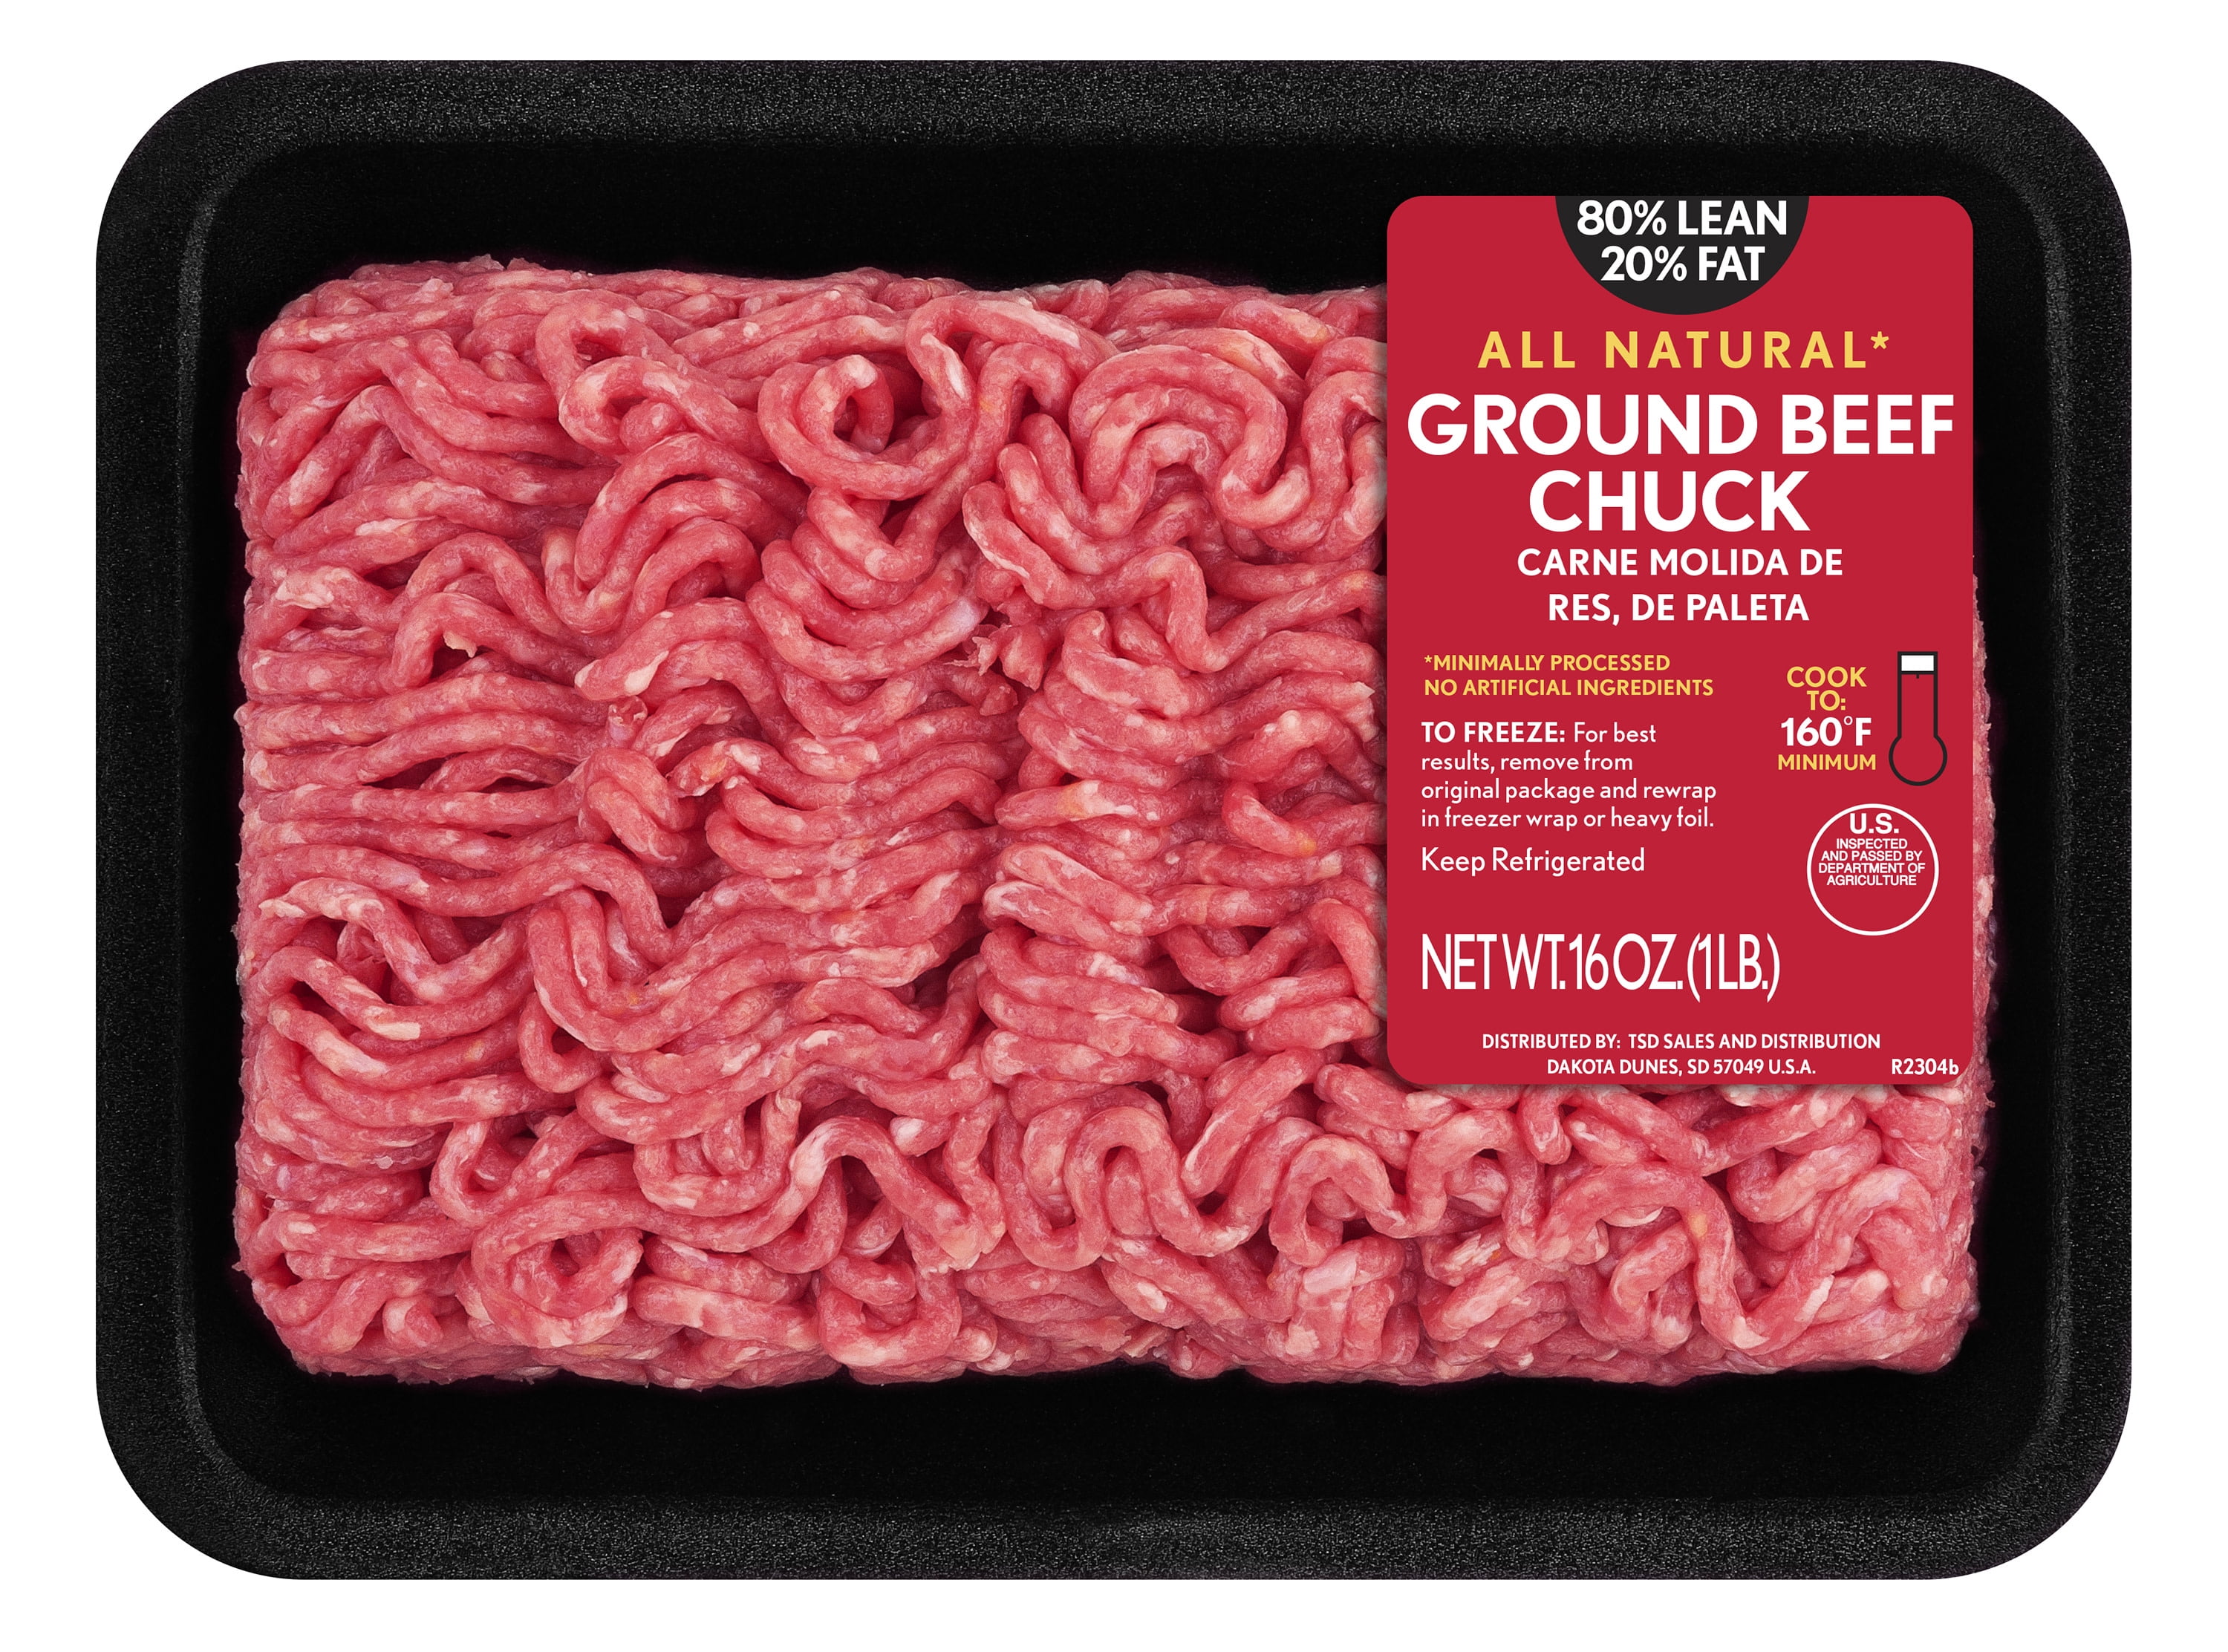 All Natural*, 80% Lean/20% Fat, Ground Beef, Chuck, Tray, 1lbs, (Fresh) -  